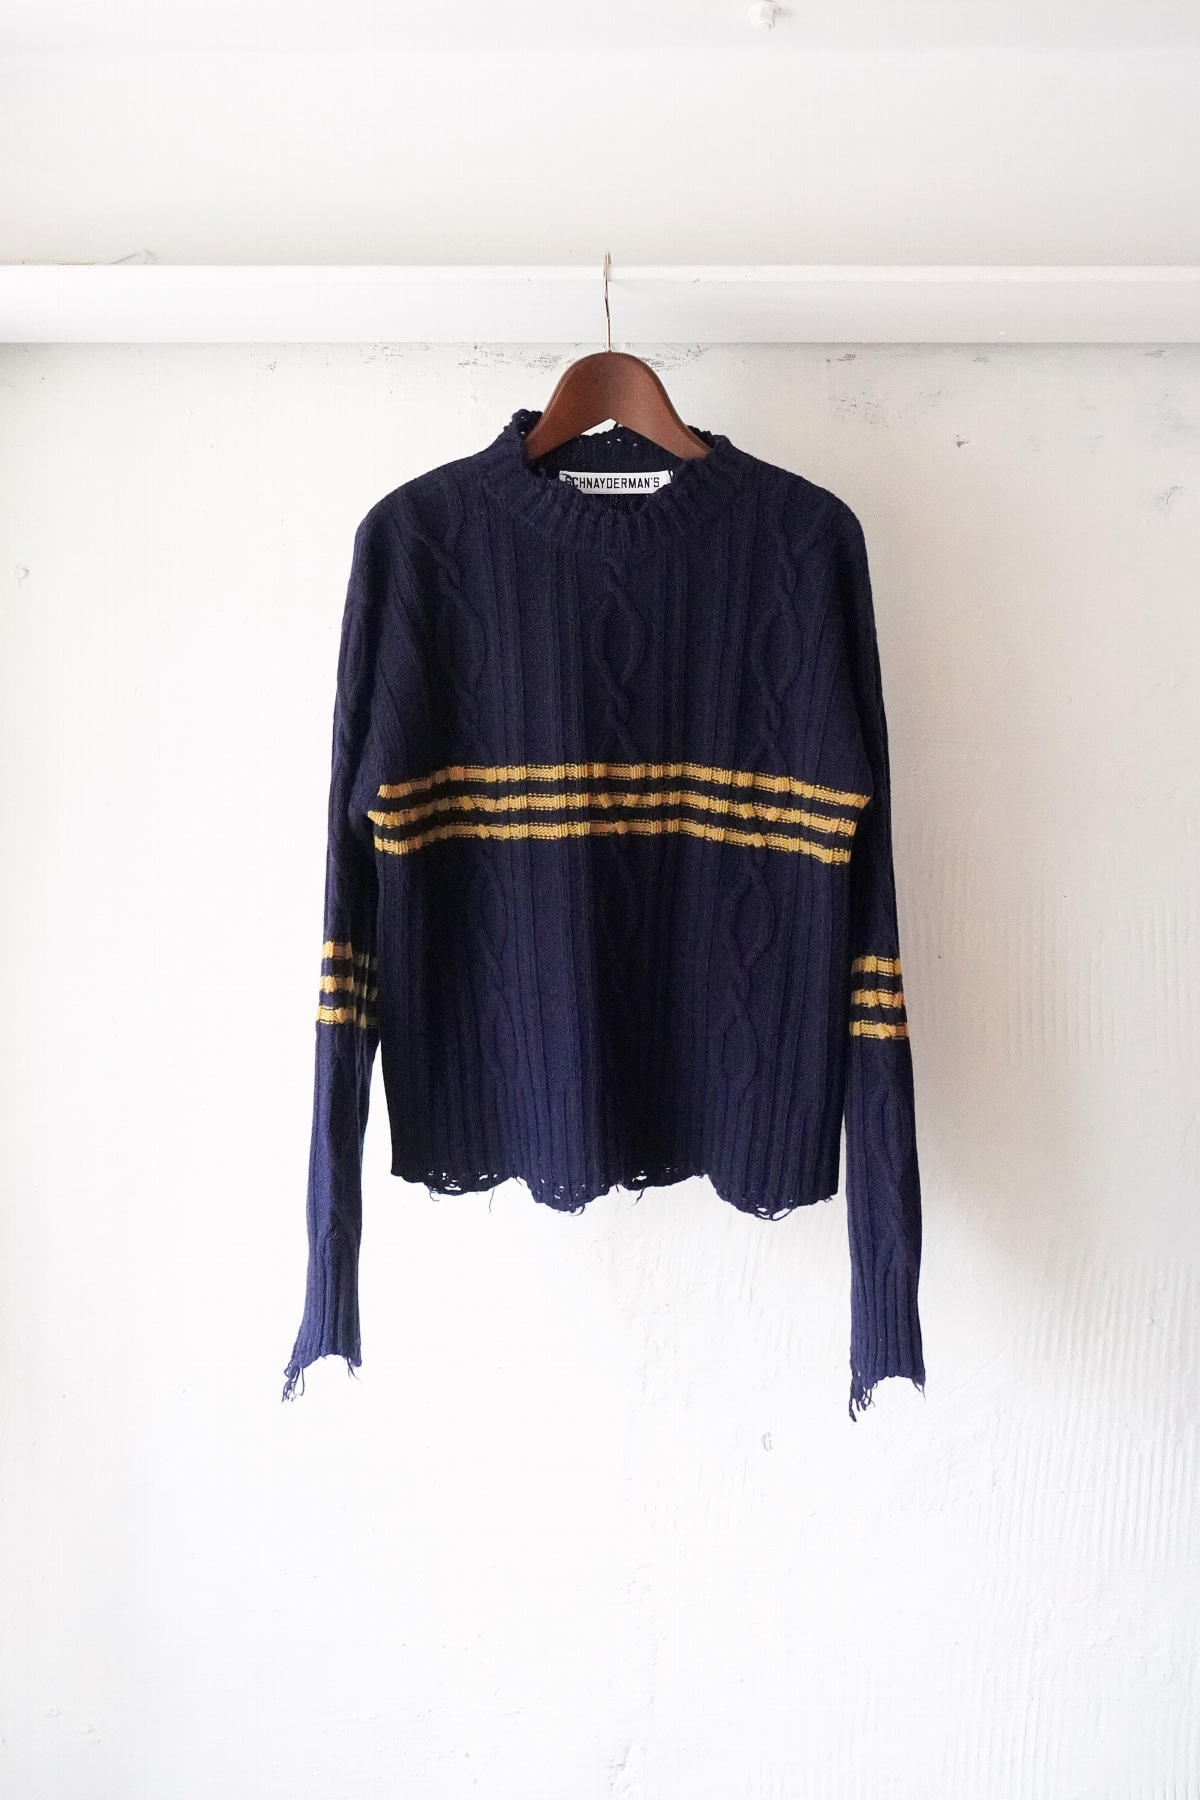 [SCHNAYDERMAN&#039;S] Cropped Cable Sweater - Dark Blue and Yellow